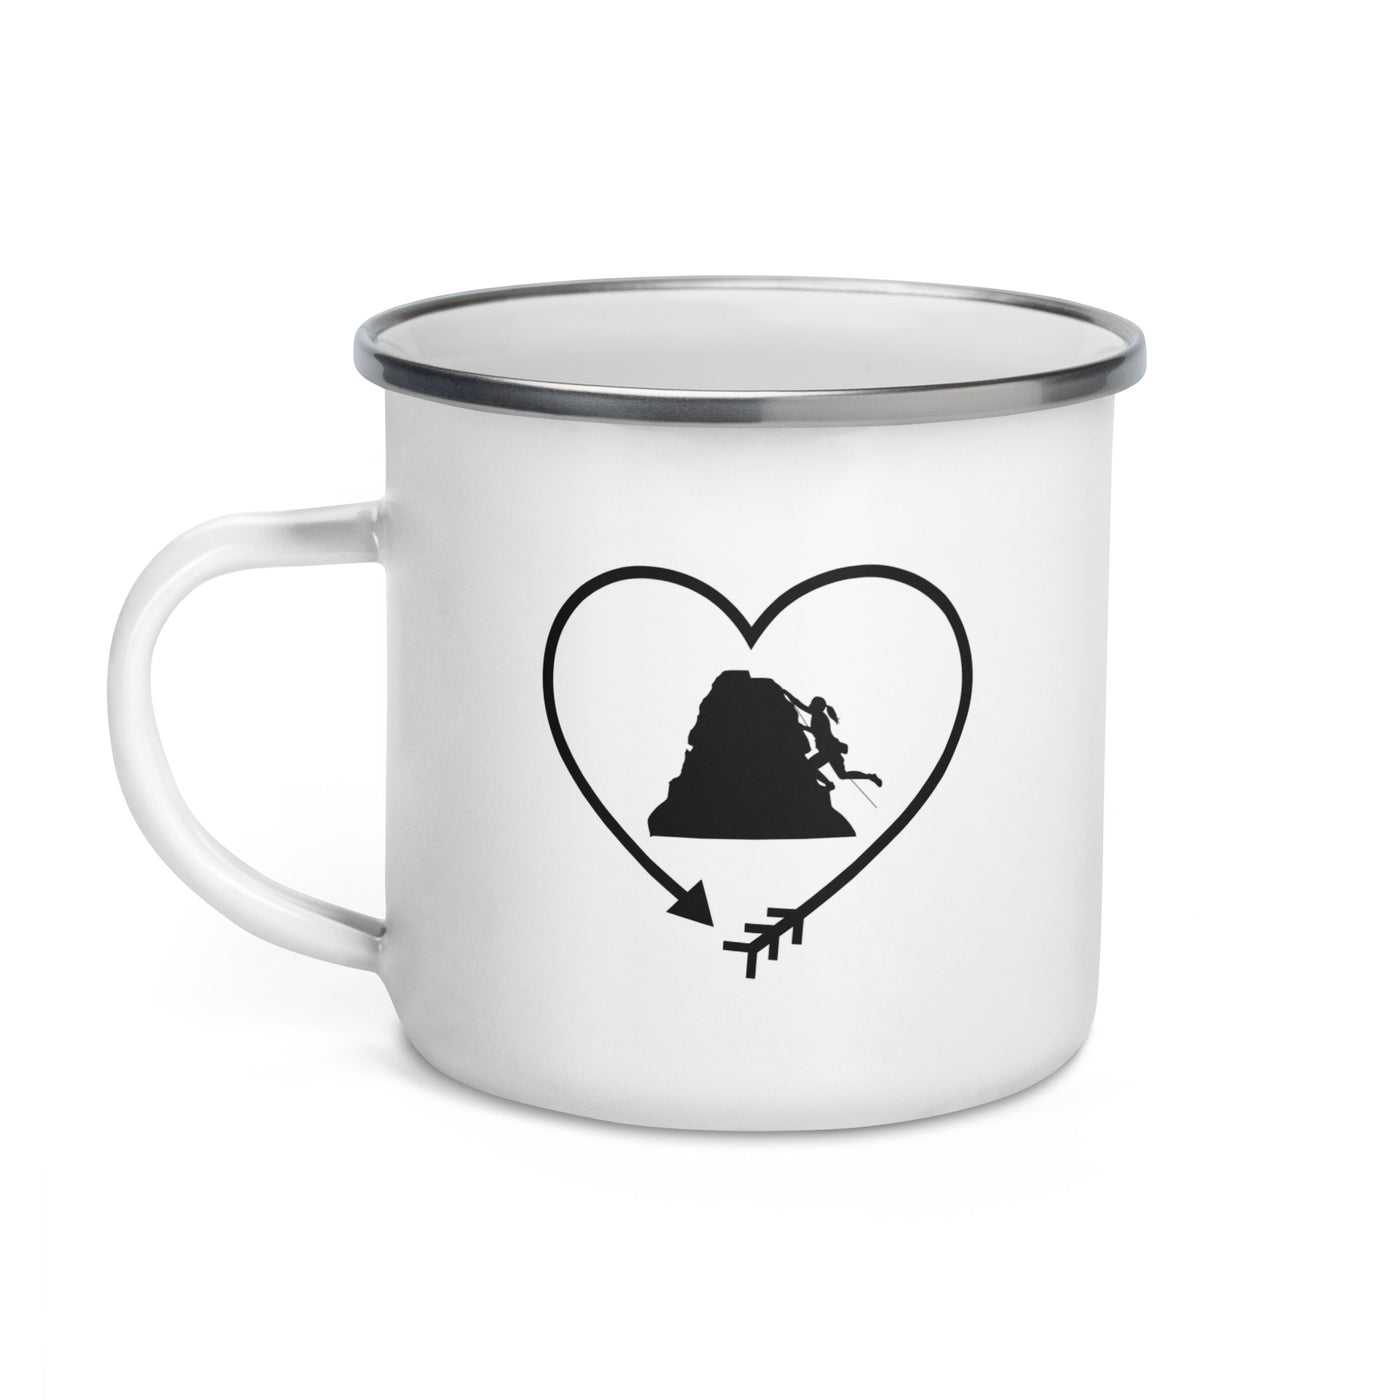 Arrow In Heartshape And Climbing 1 - Emaille Tasse klettern